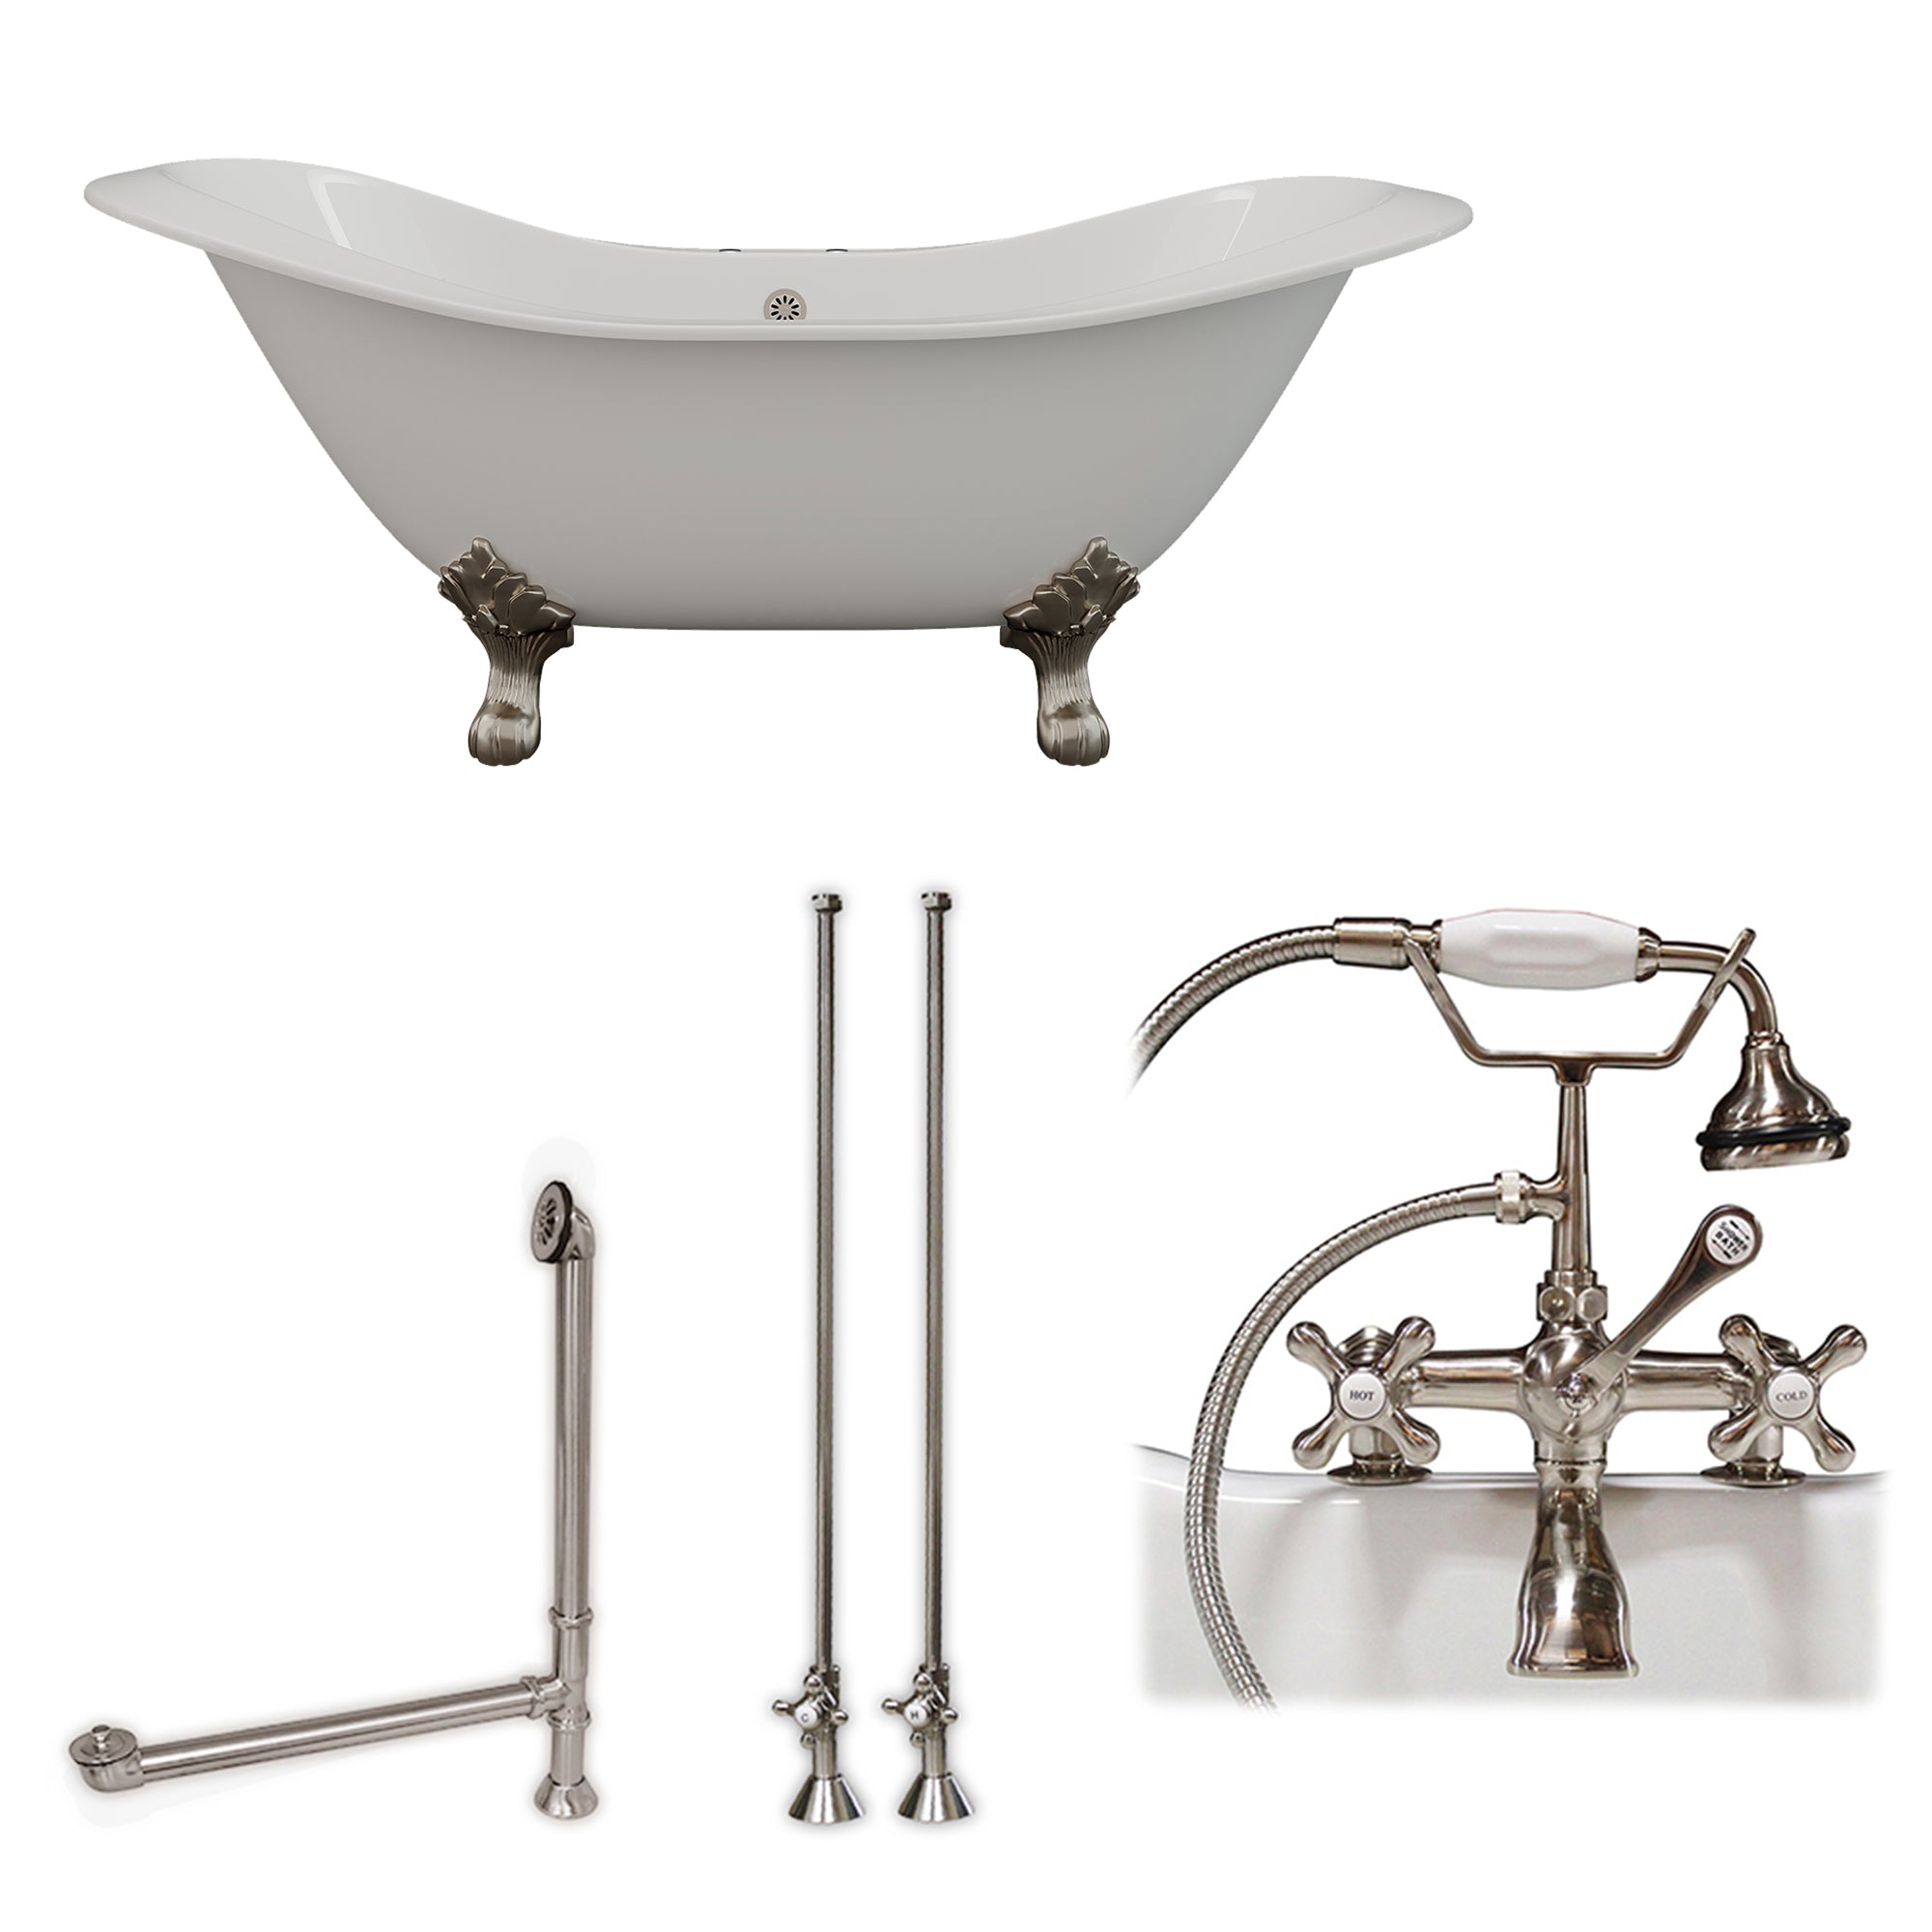 Cambridge Plumbing Double Slipper Cast Iron Soaking Tub (Porcelain interior and white paint exterior) with Lion’s Paw Feet and Deck Mount Plumbing Package (Brushed nickel) DES-463D-2-PKG-7DH - Vital Hydrotherapy